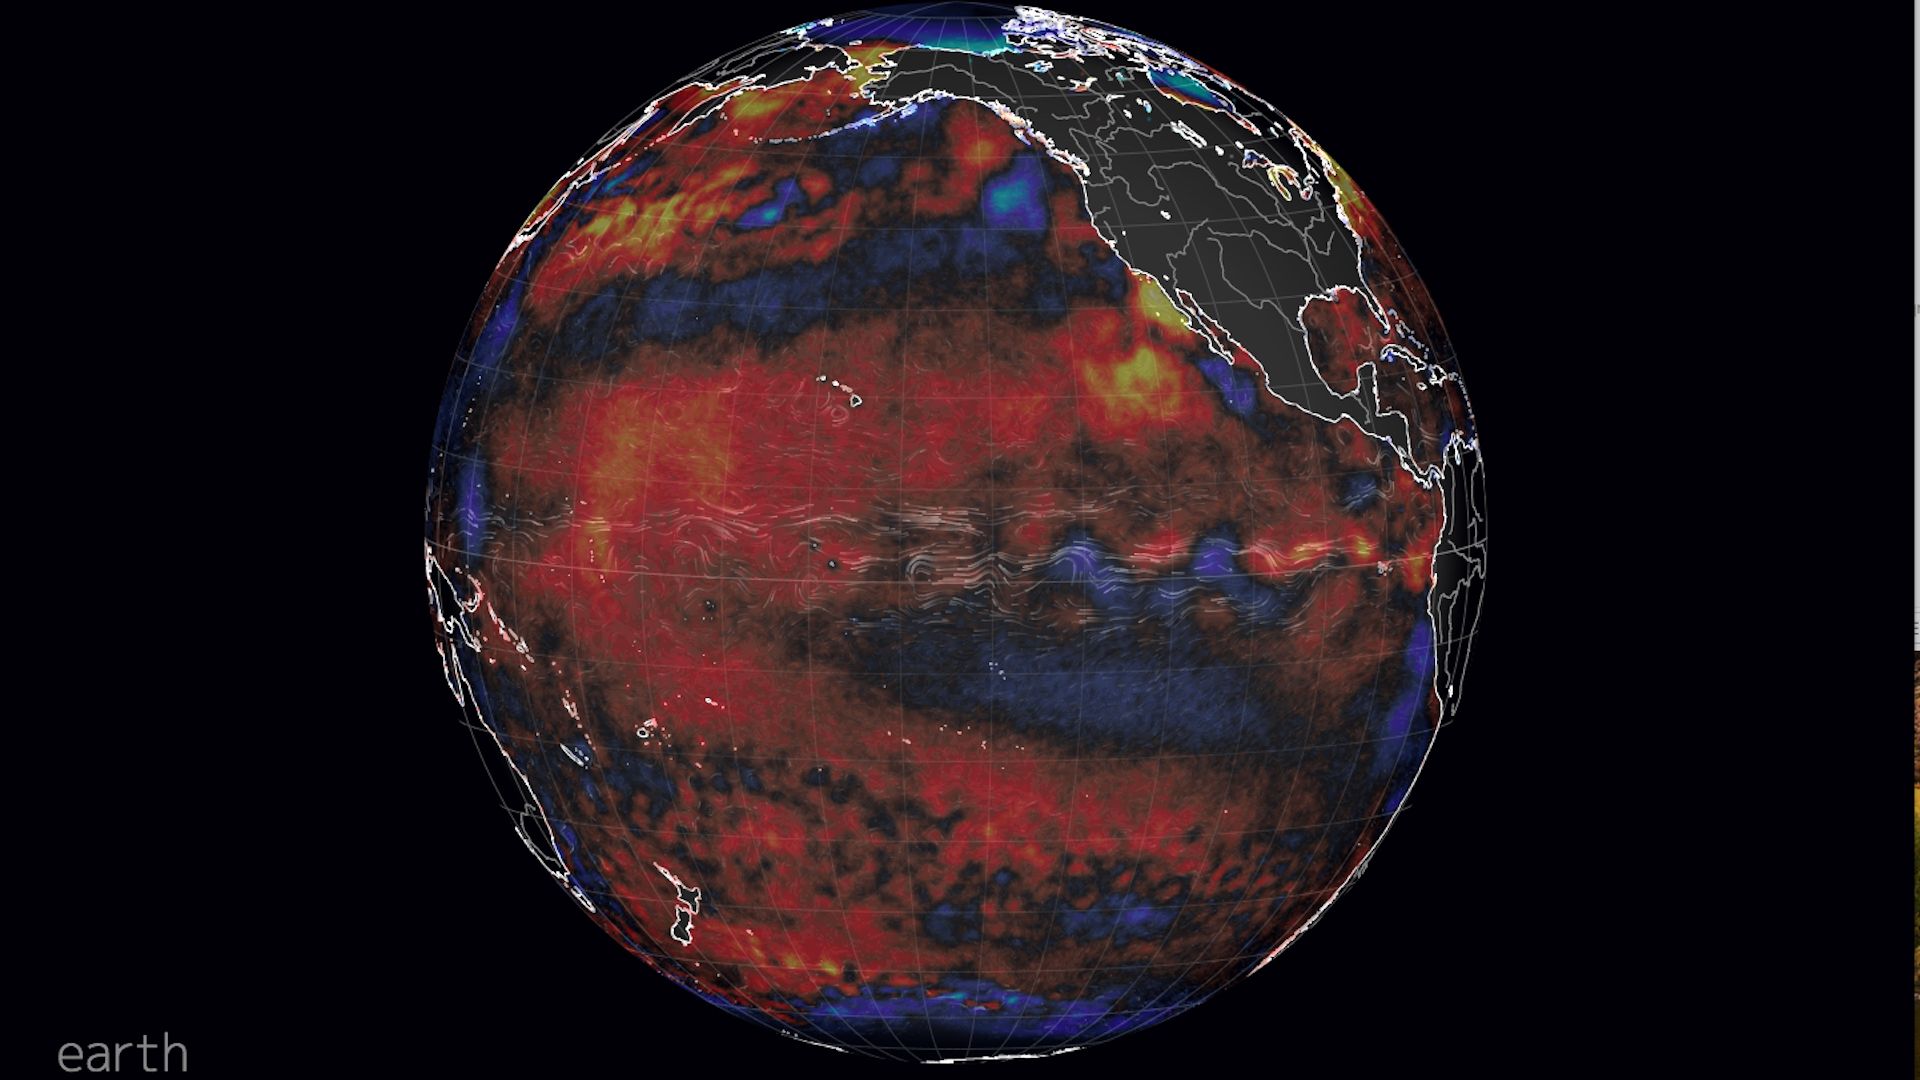 Global sea surface temperature anomalies, showing warming near the equator in the Pacific Ocean.